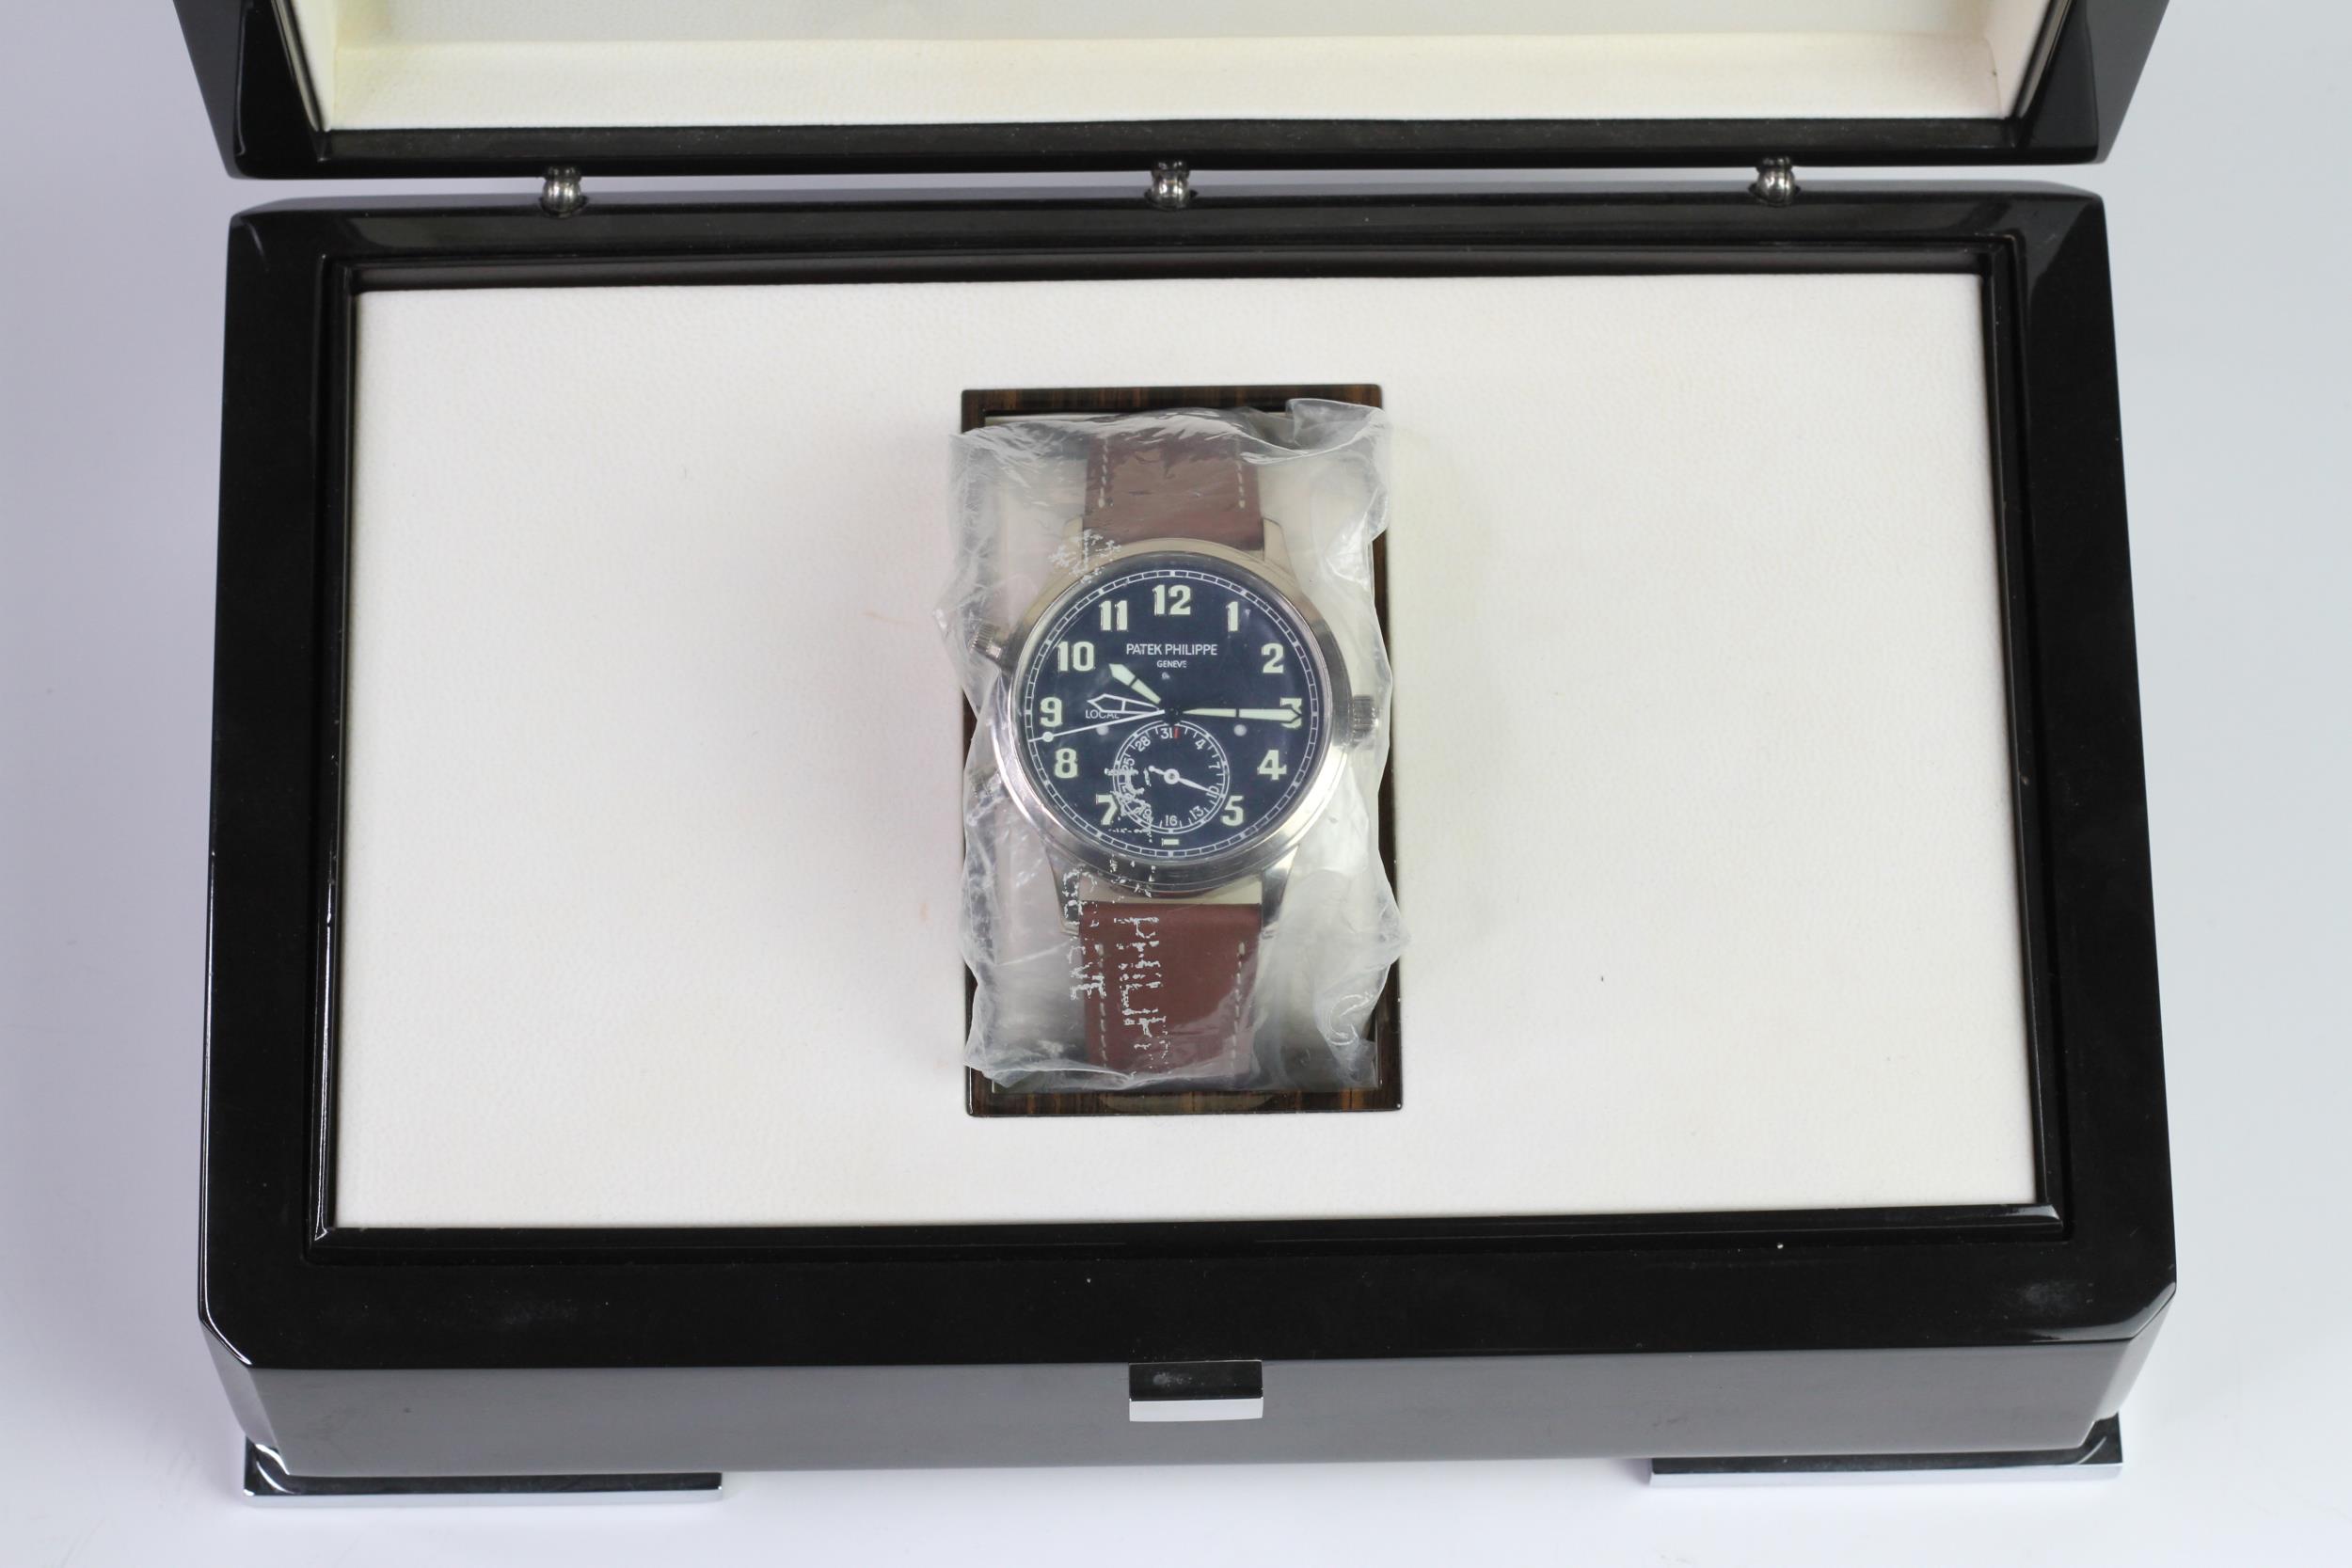 A FINE PATEK PHILIPPE CALATRAVA PILOT TRAVEL TIME REFERENCE 5224G-001, SEALED FROM SERVICE, WITH BOX - Image 3 of 19